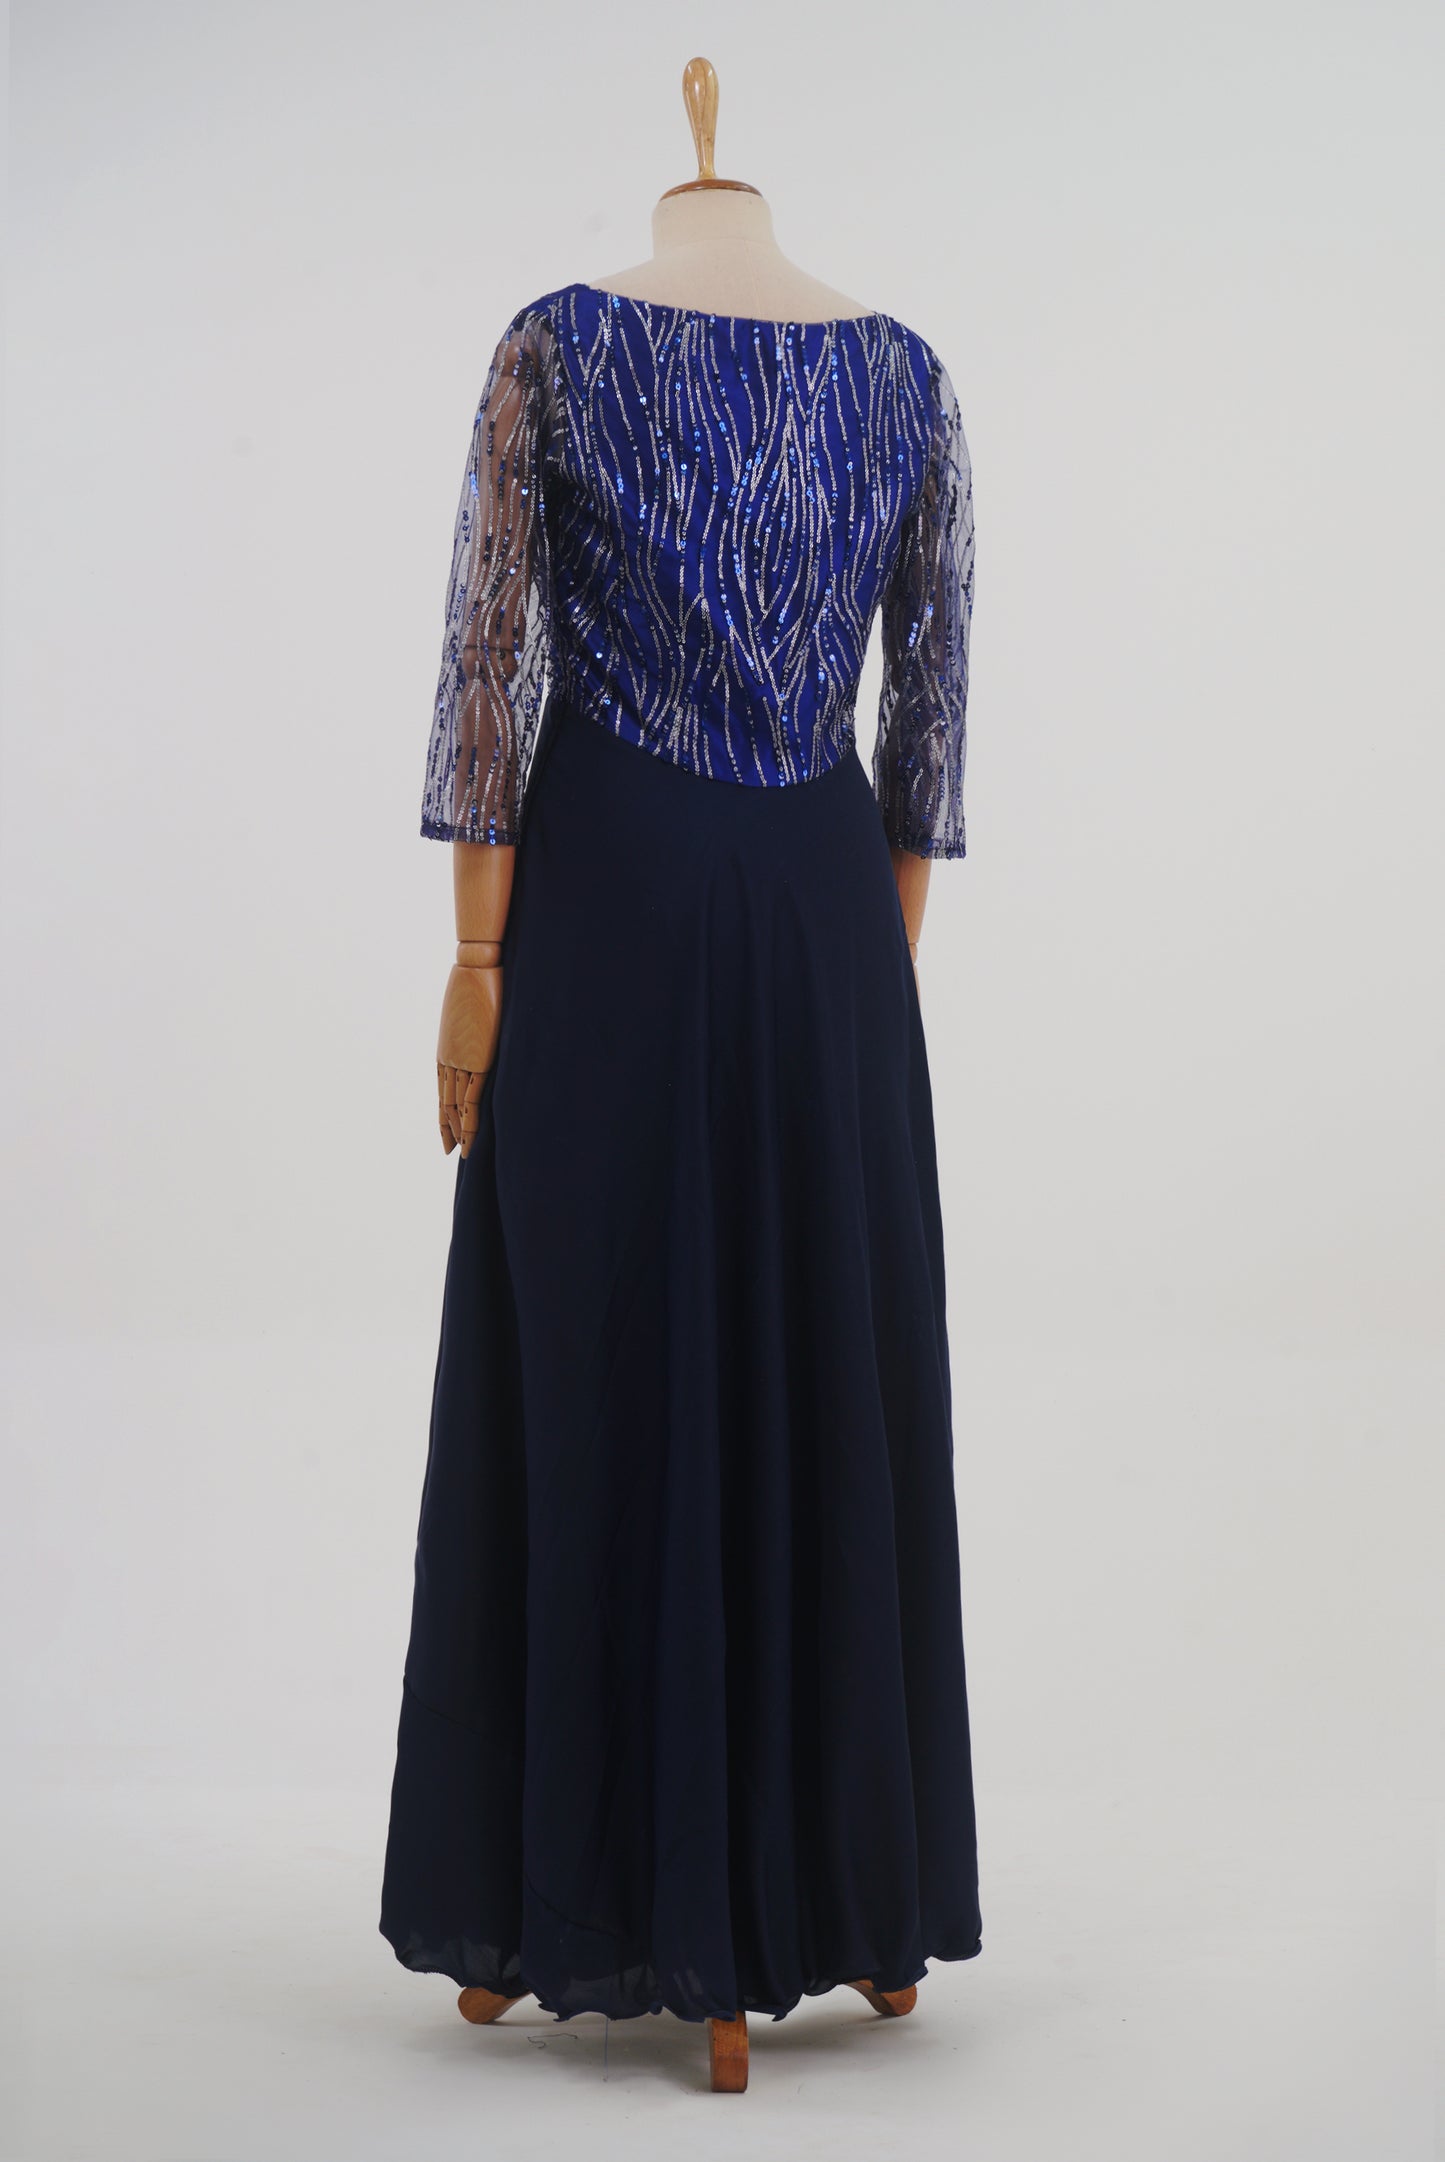 ZIA256 Blue Netted Gown with V neck.